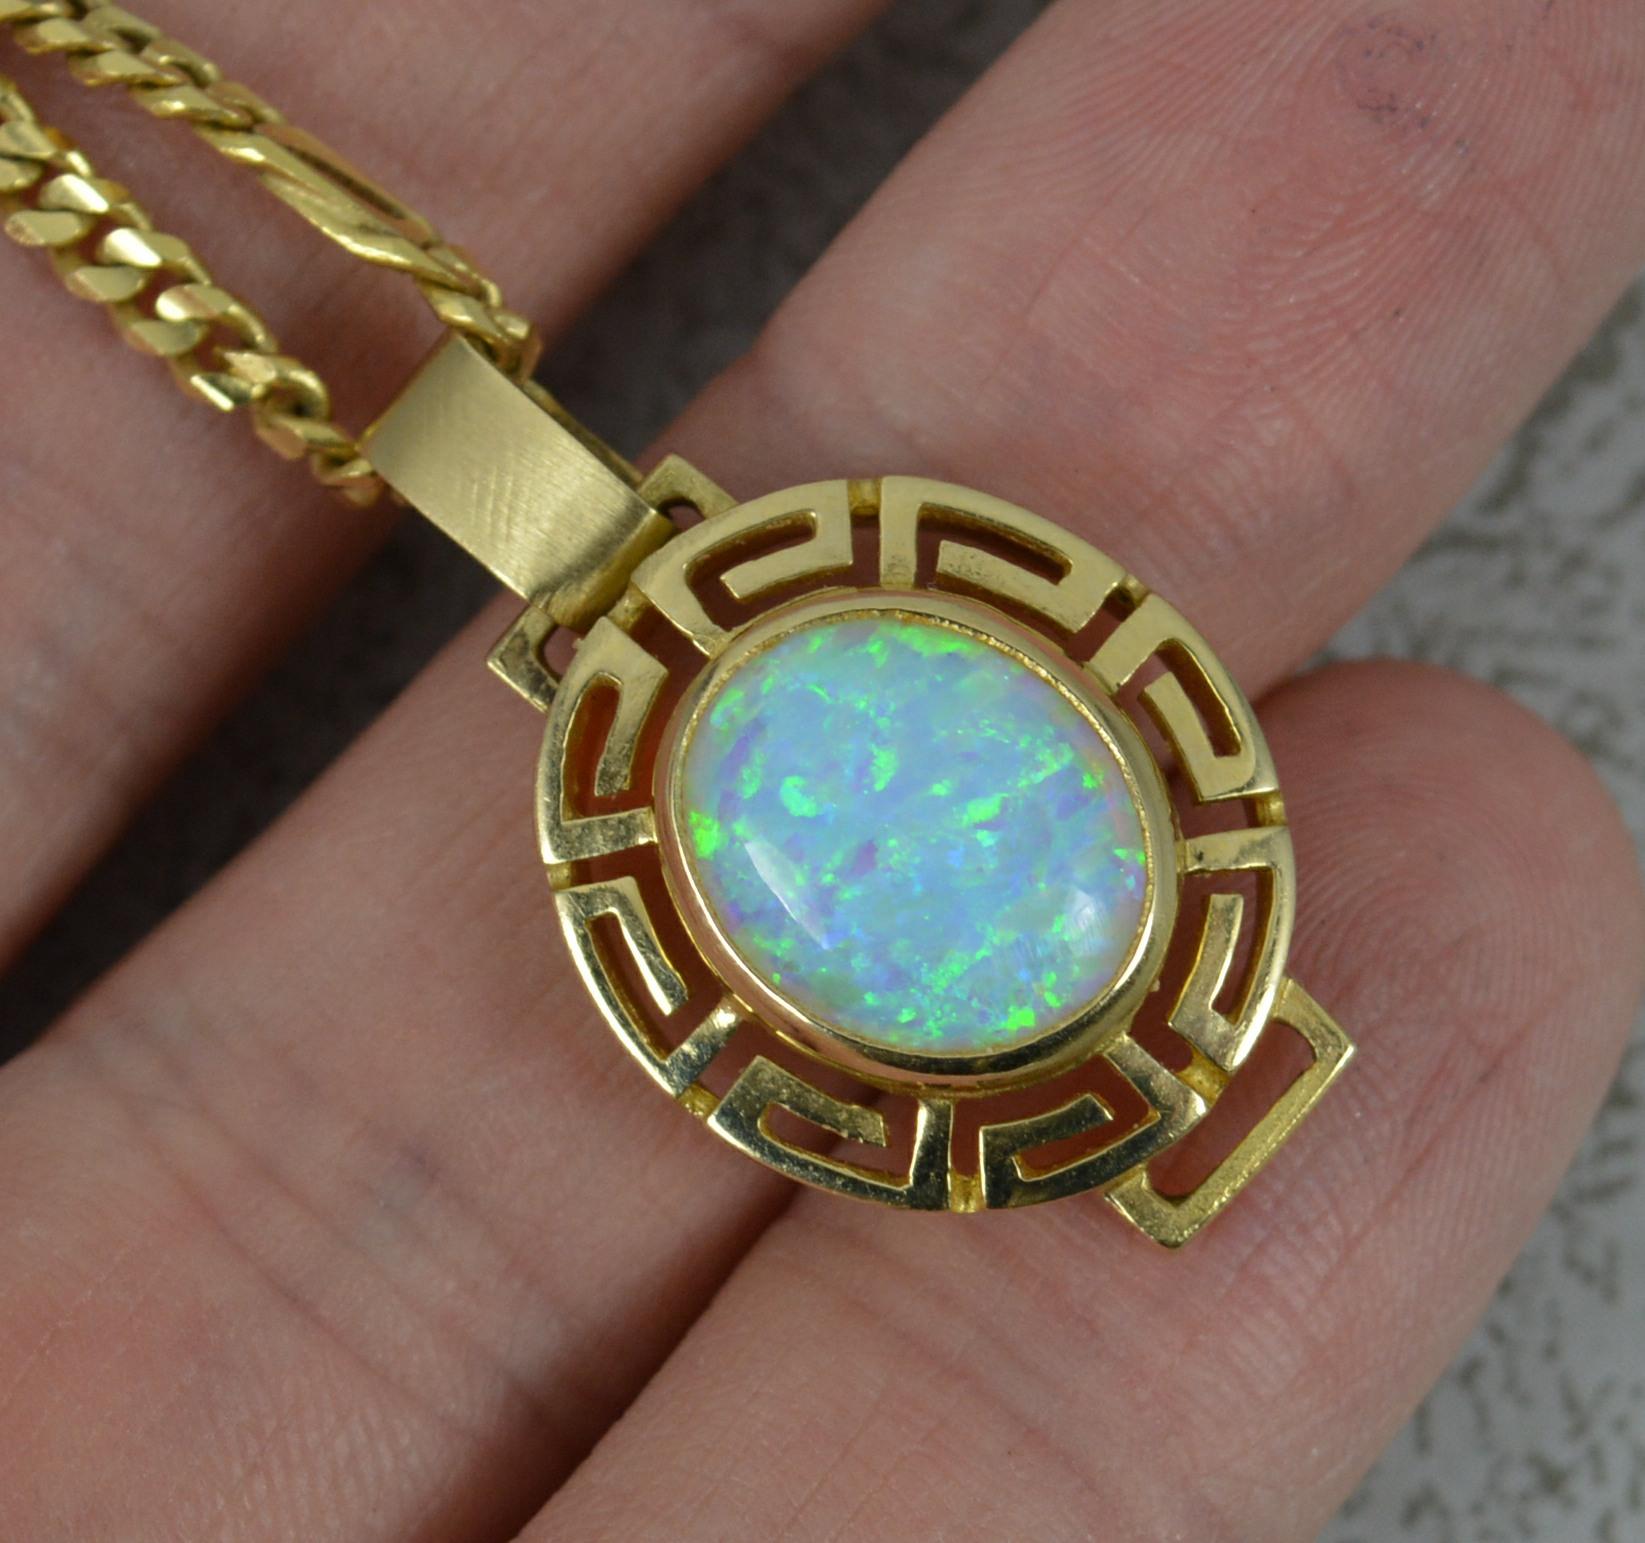 A superb 14 carat gold and opal pendant.
Large and colourful opal composite stone to centre with Greek pierced design gold border.
Complete with long fine curb link chain. 

Condition ; Excellent. Crisp design. Issue free.

Please view photographs